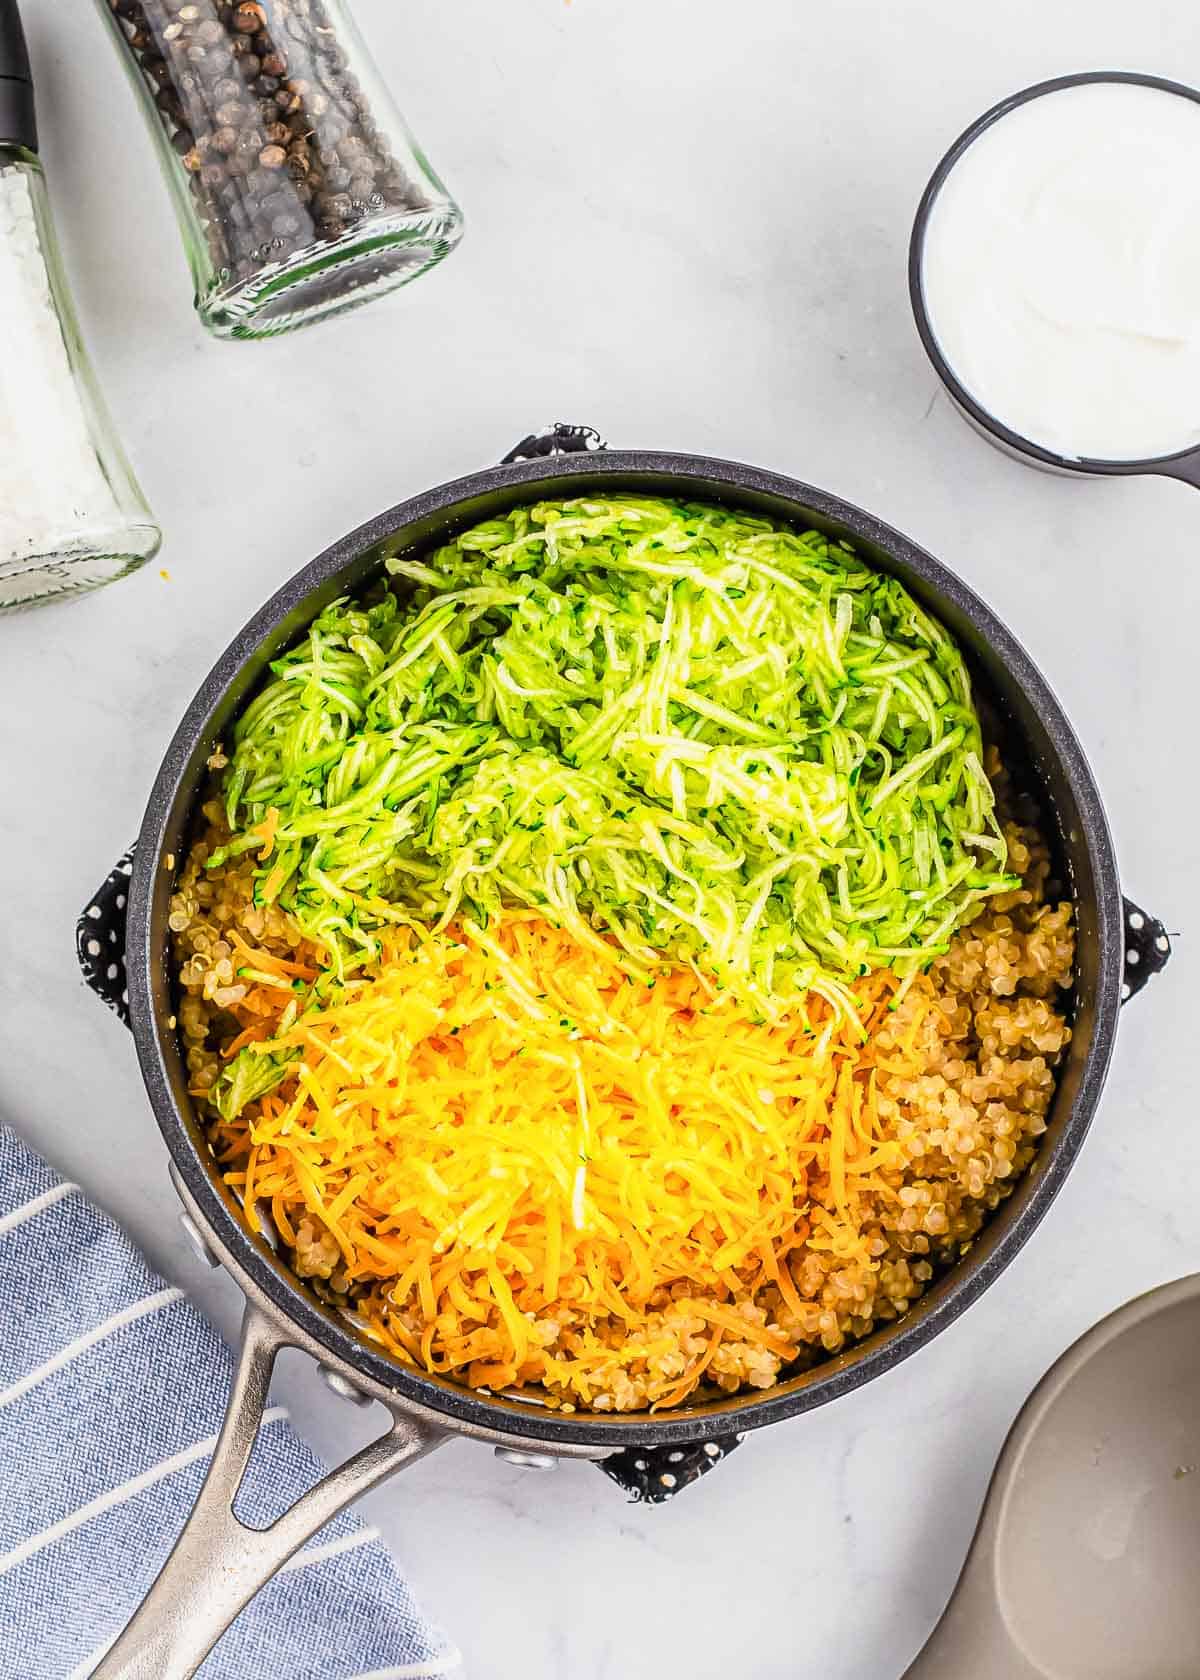 A skillet filled with shredded zucchini, cheese and quinoa.